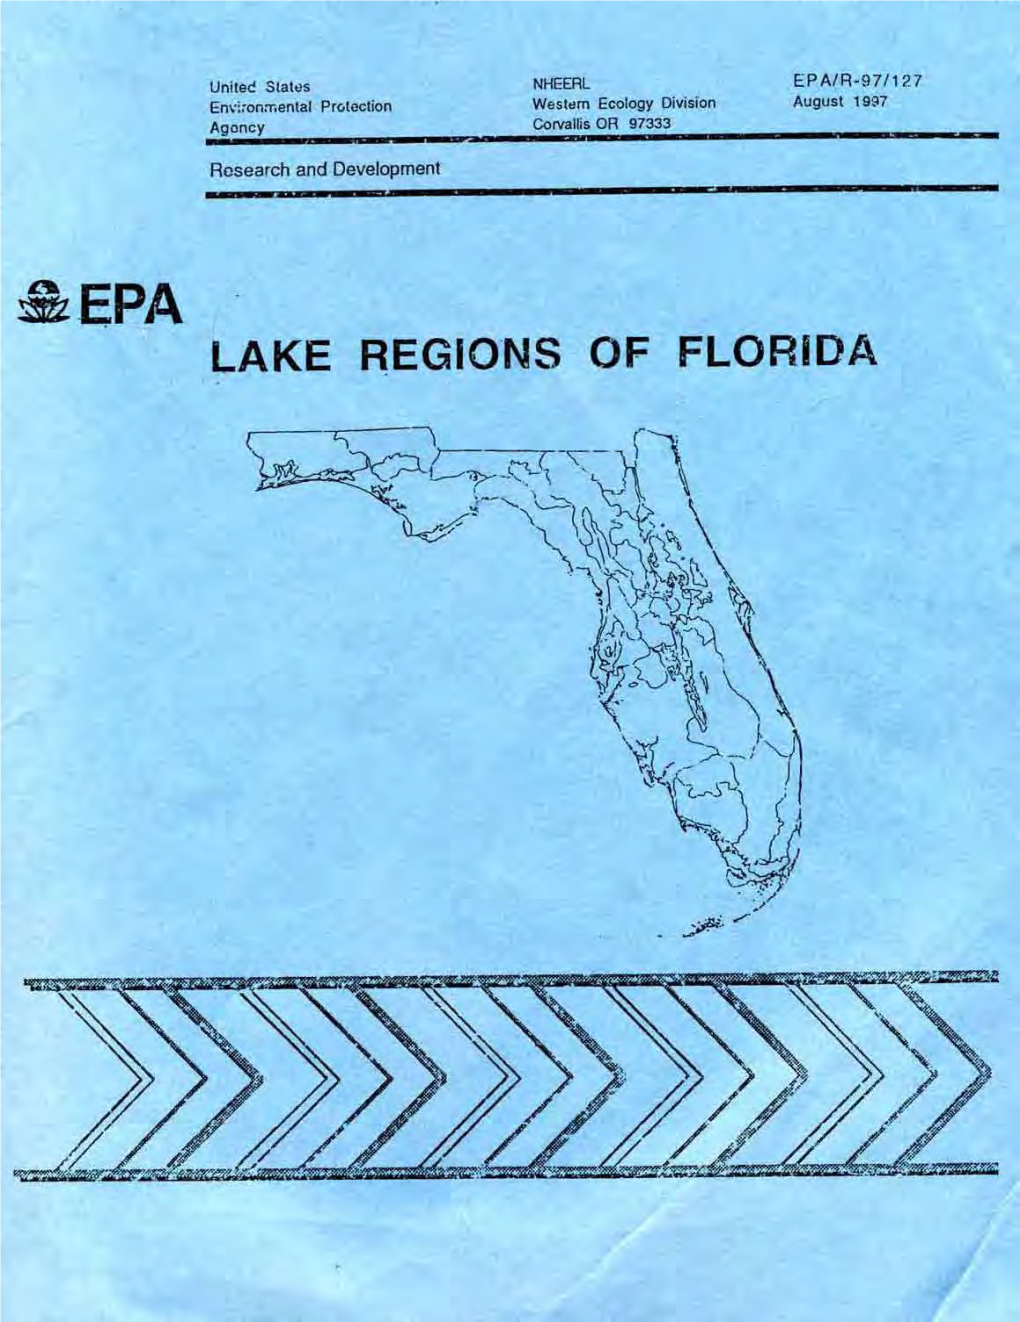 Florida Lake Regions and Associated Maps and Graphs of Lake Chemistry Are Intended to Provide an Effective Framework for Assessing Lake Characteristics